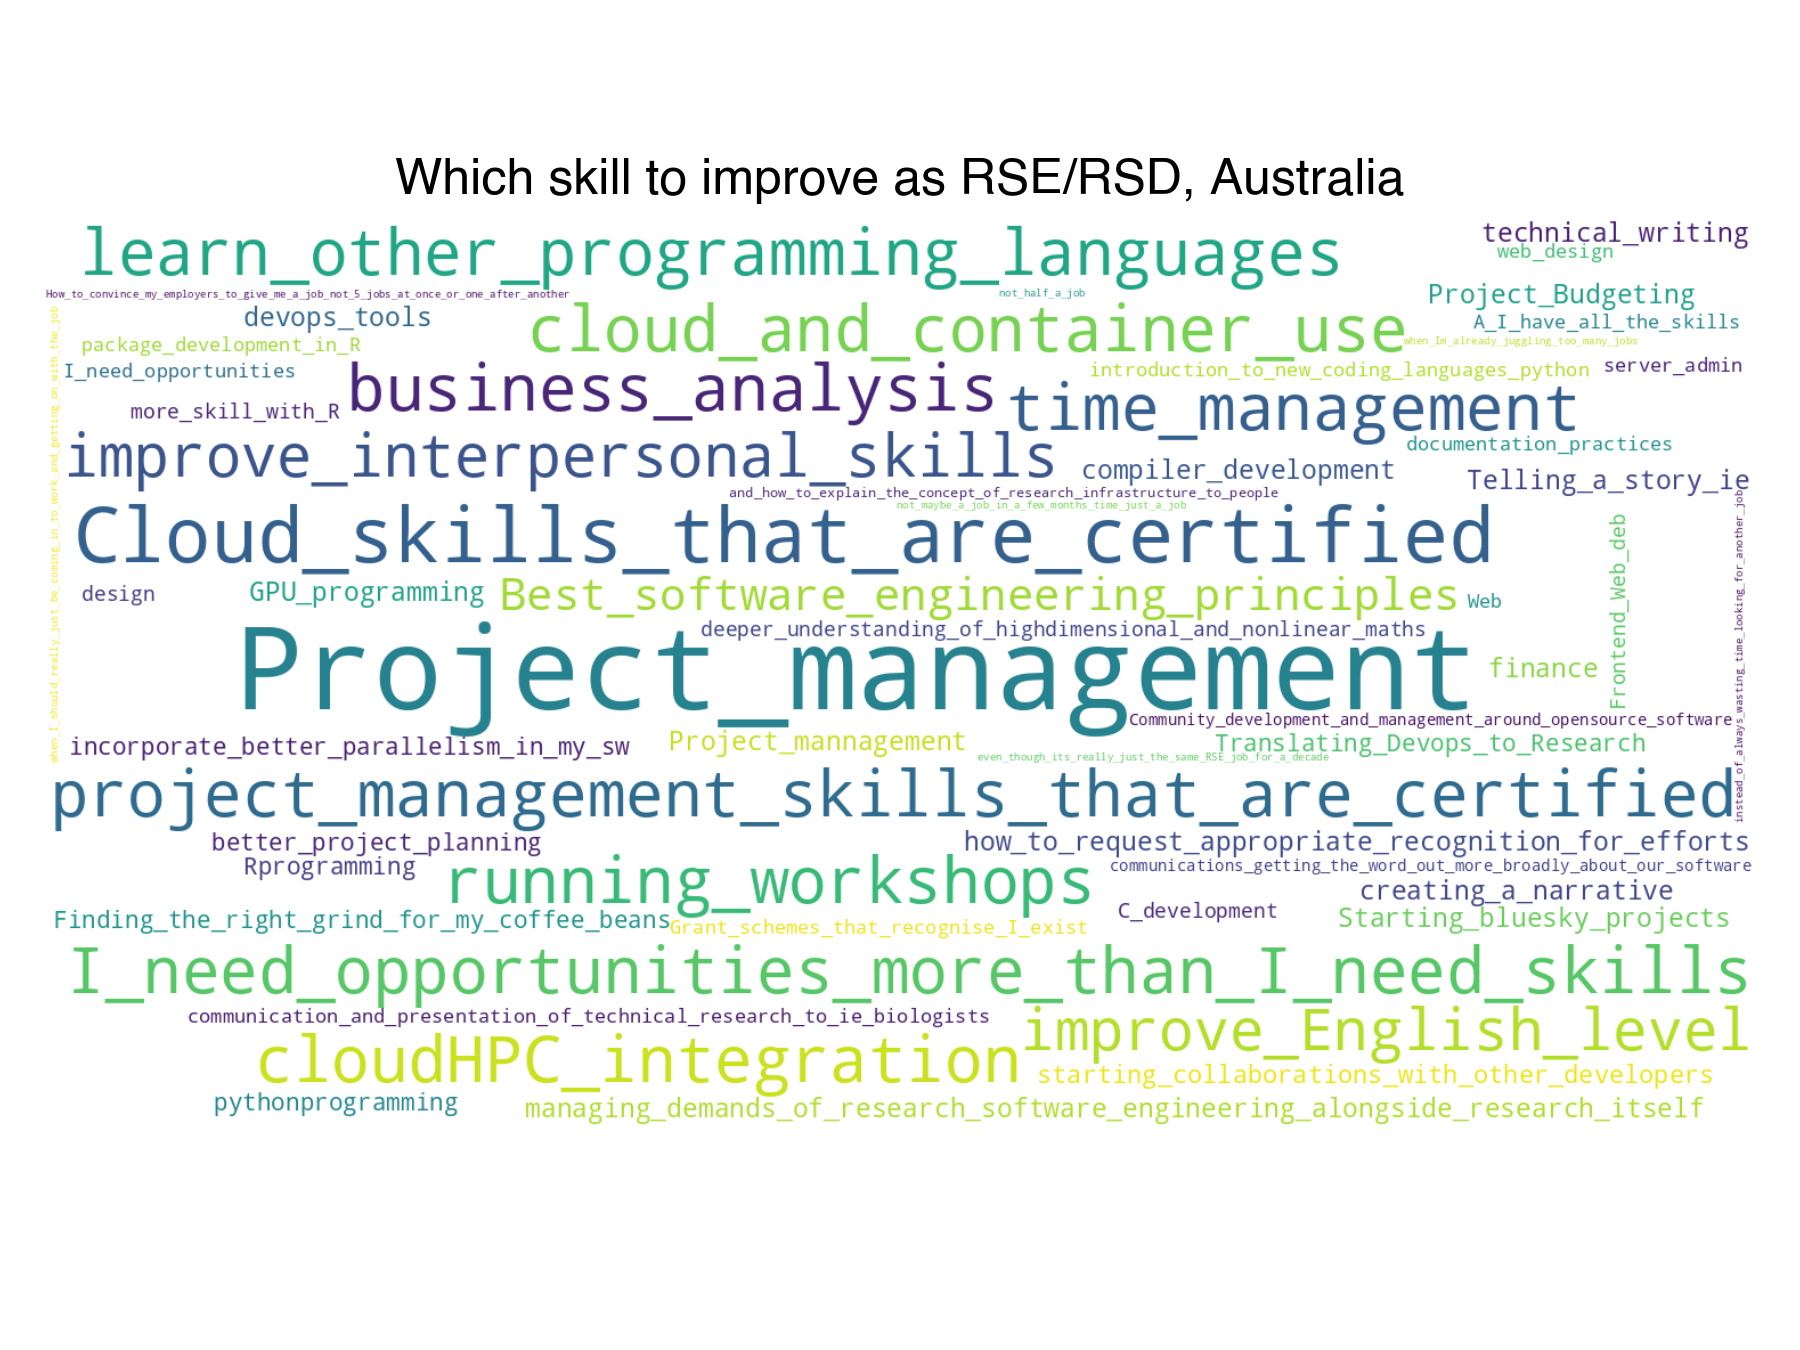 which-skills-to-improve-rse-rsd-wordcloud